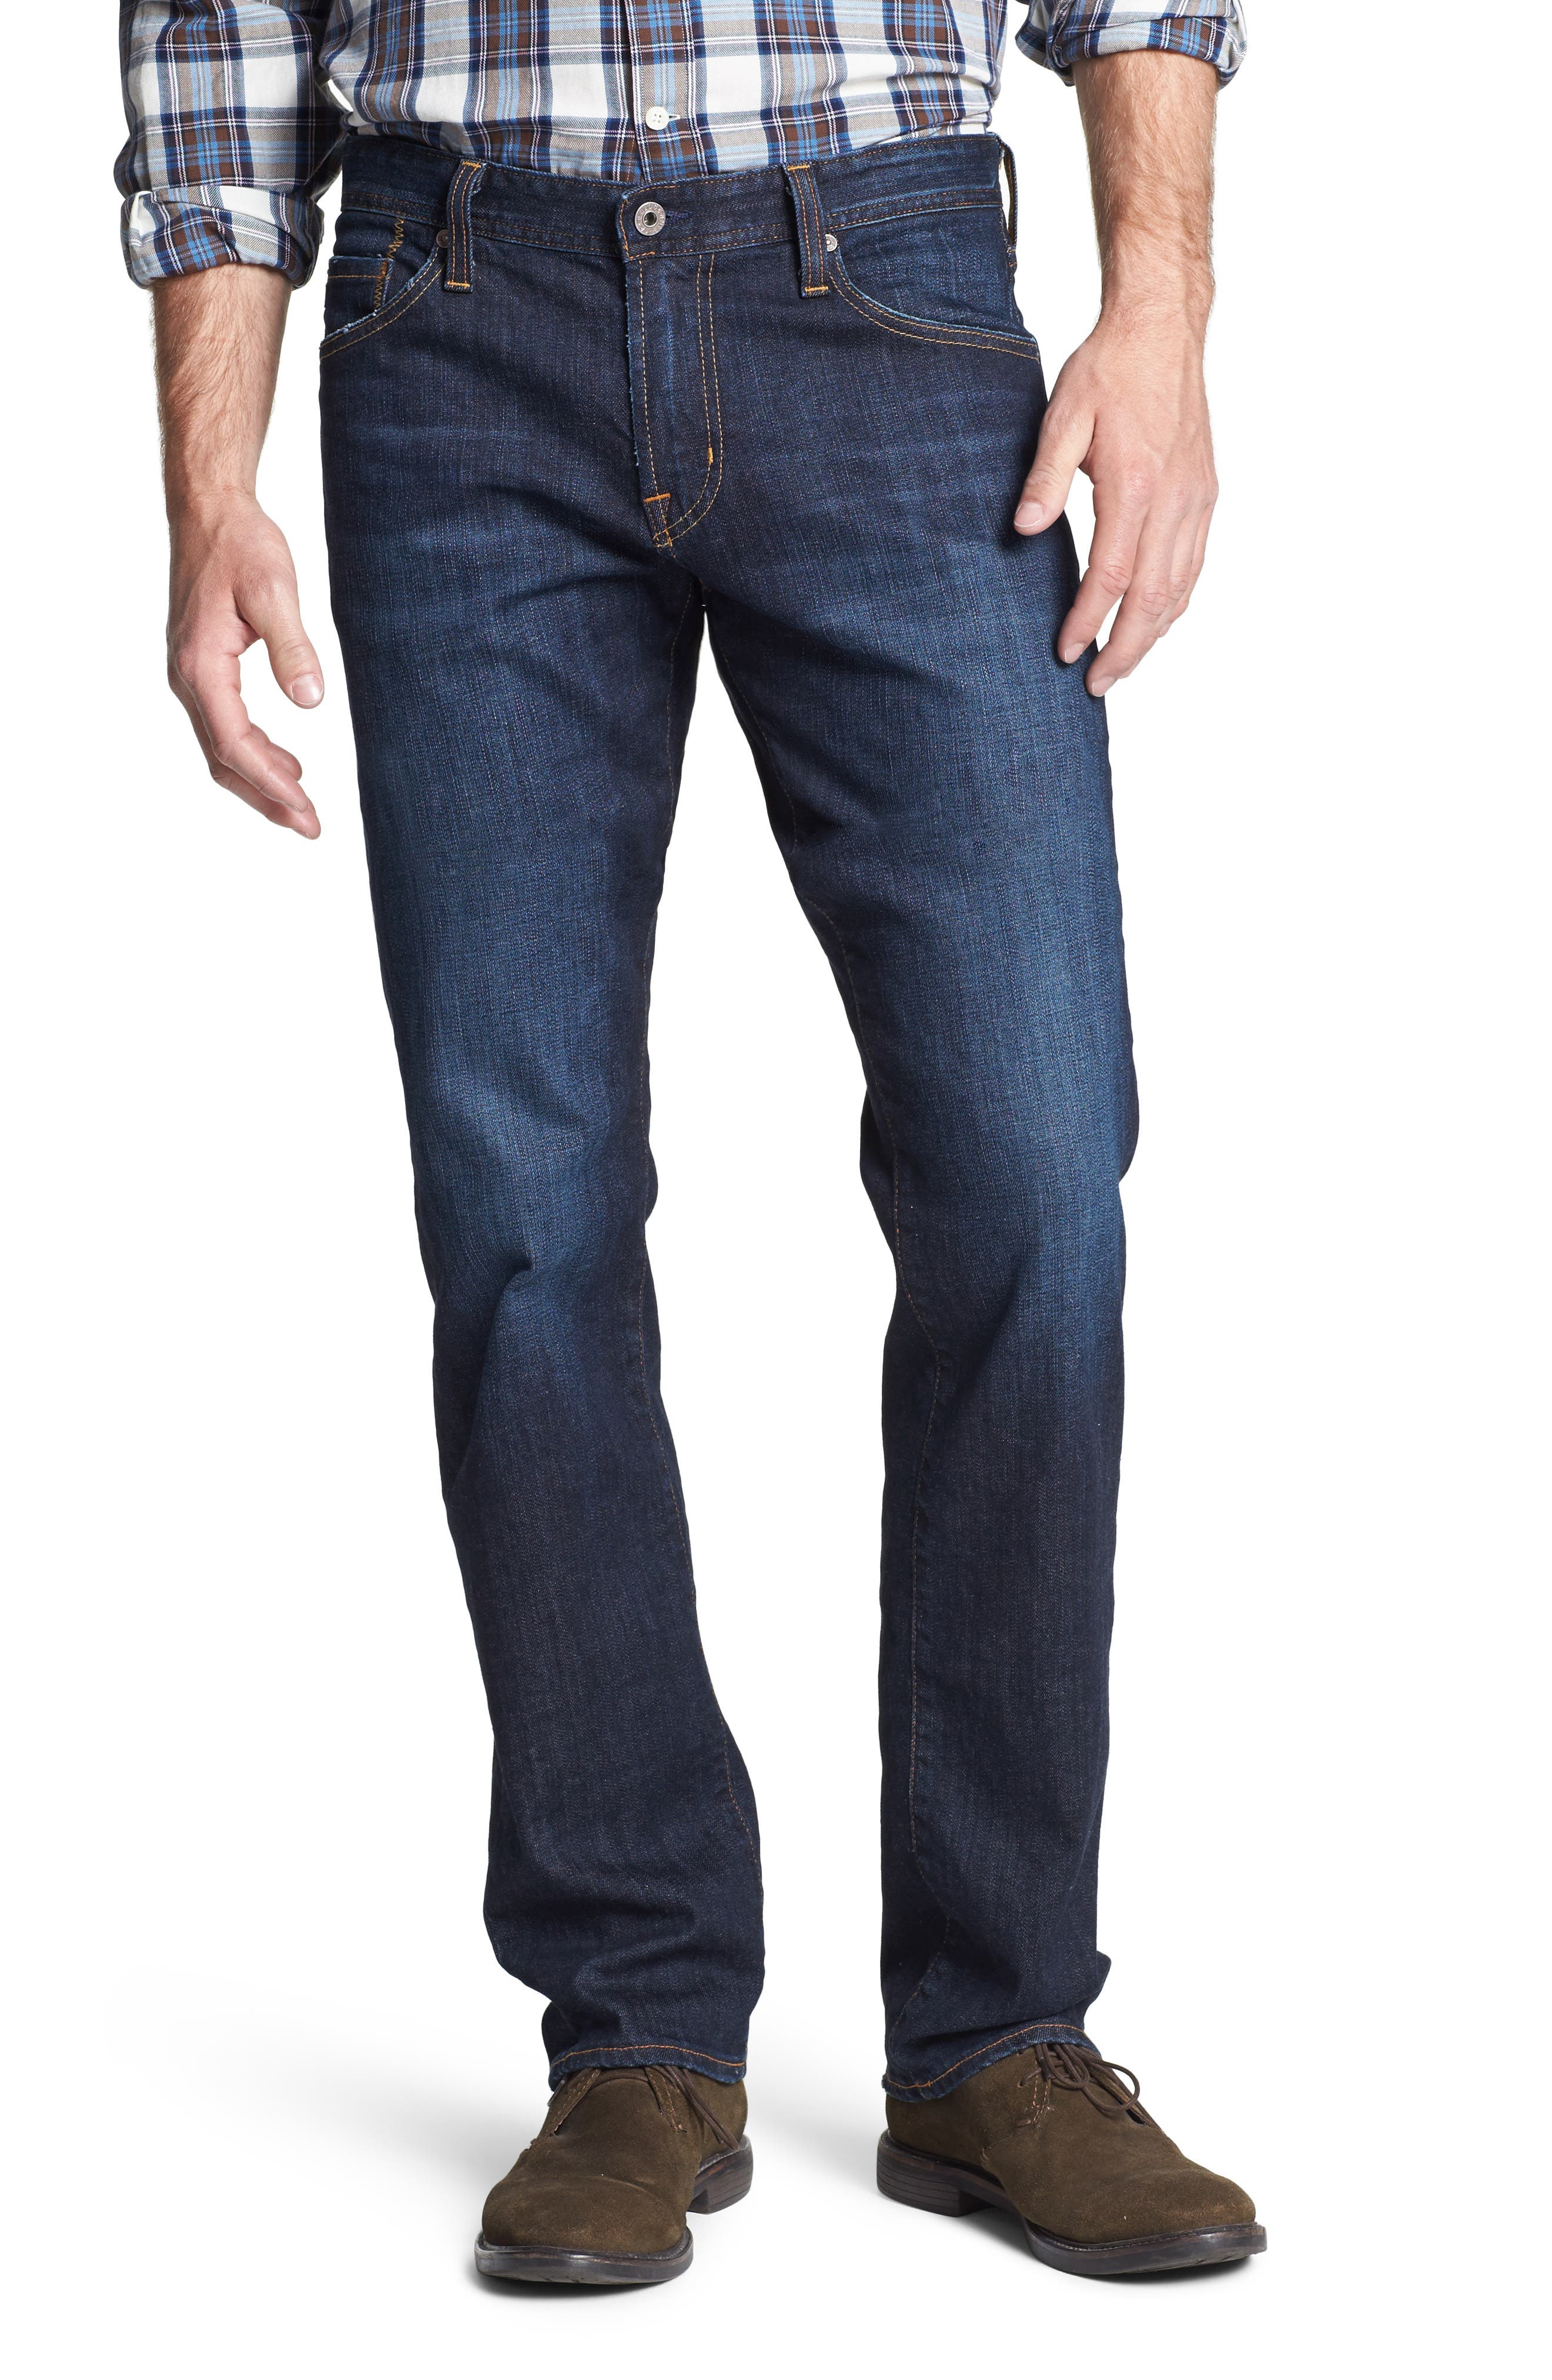 shoes to wear with straight leg jeans mens